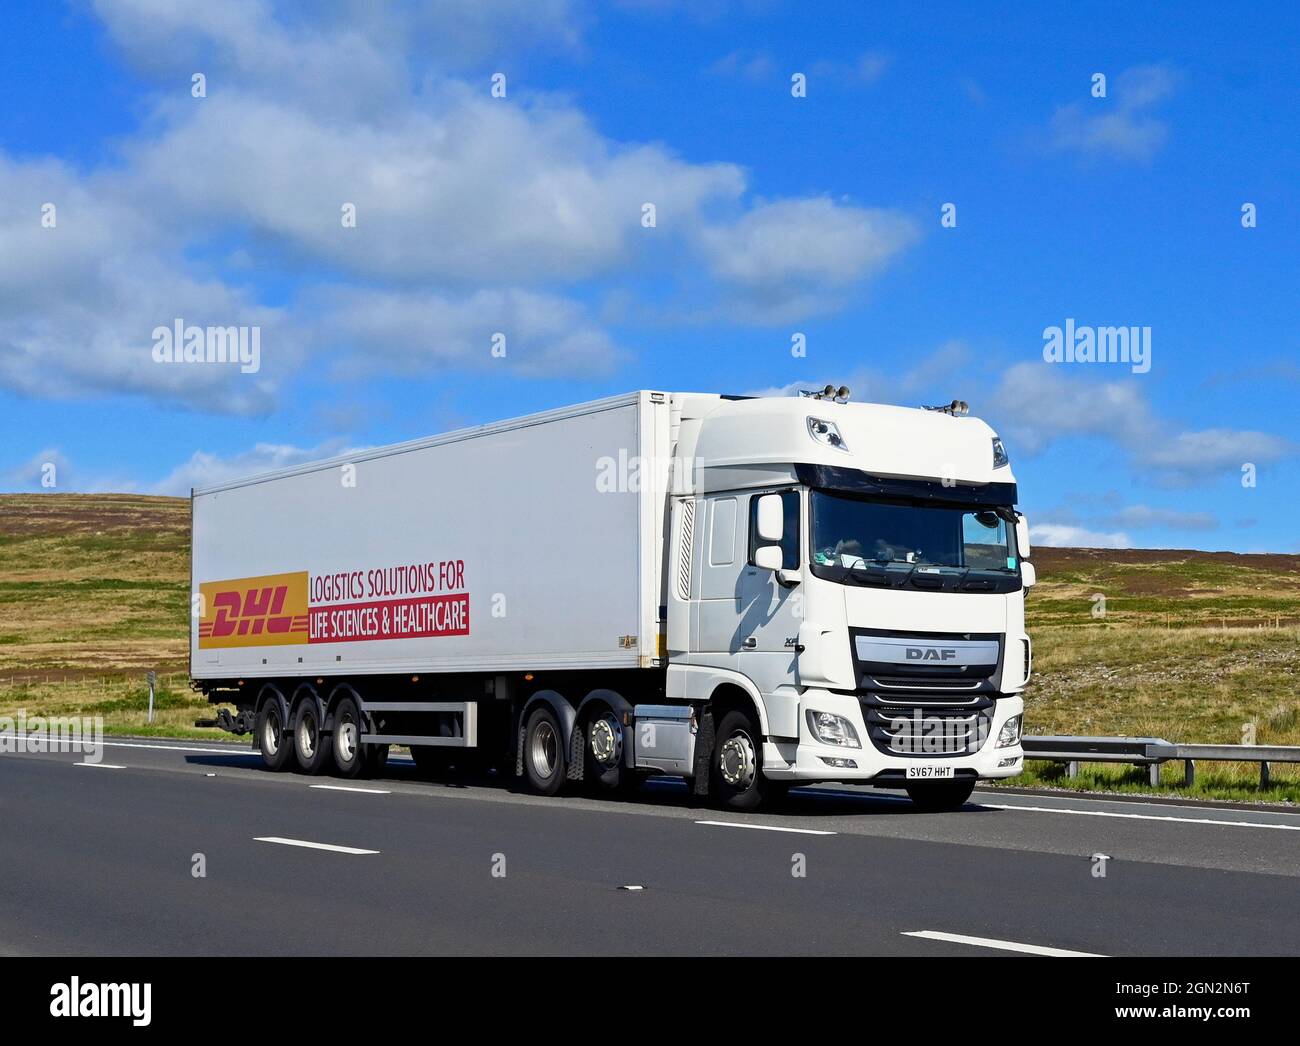 HGV. DHL Logistics Solutions for Life Sciences & Healthcare. M6 Motorway, Southbound. Shap, Cumbria, England, United Kingdom, Europe. Stock Photo